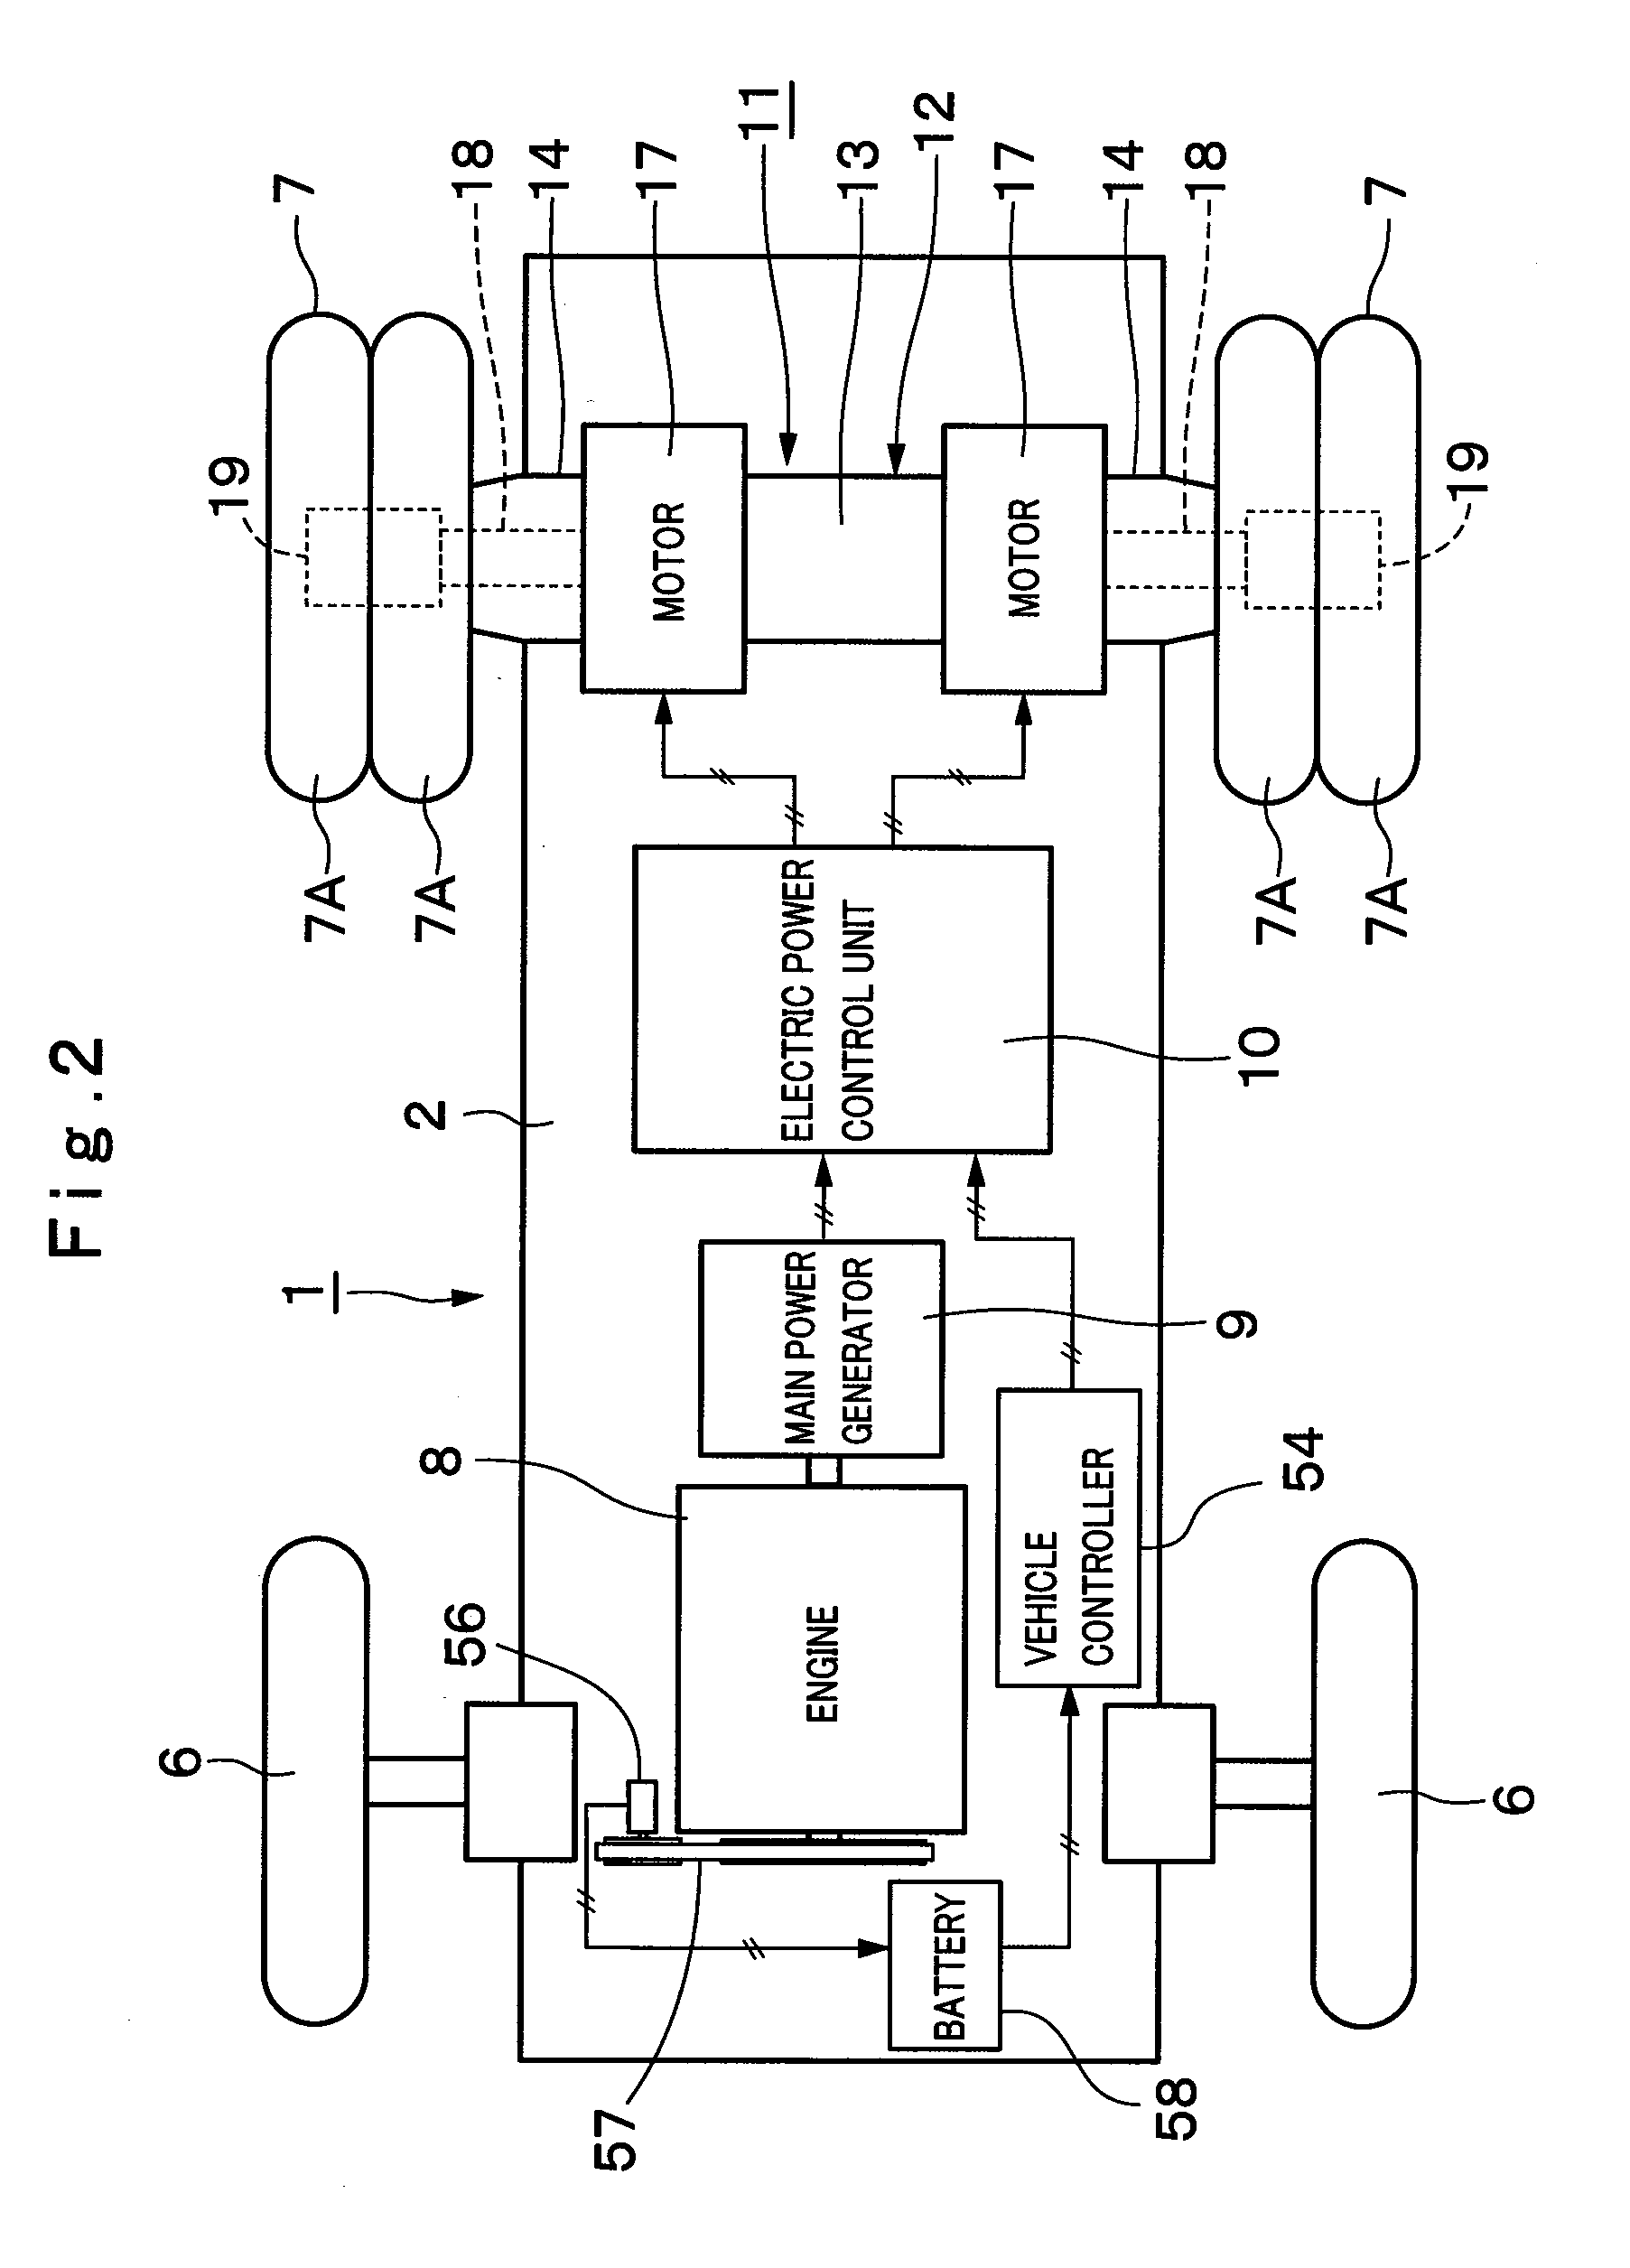 Travel drive apparatus for a working vehicle